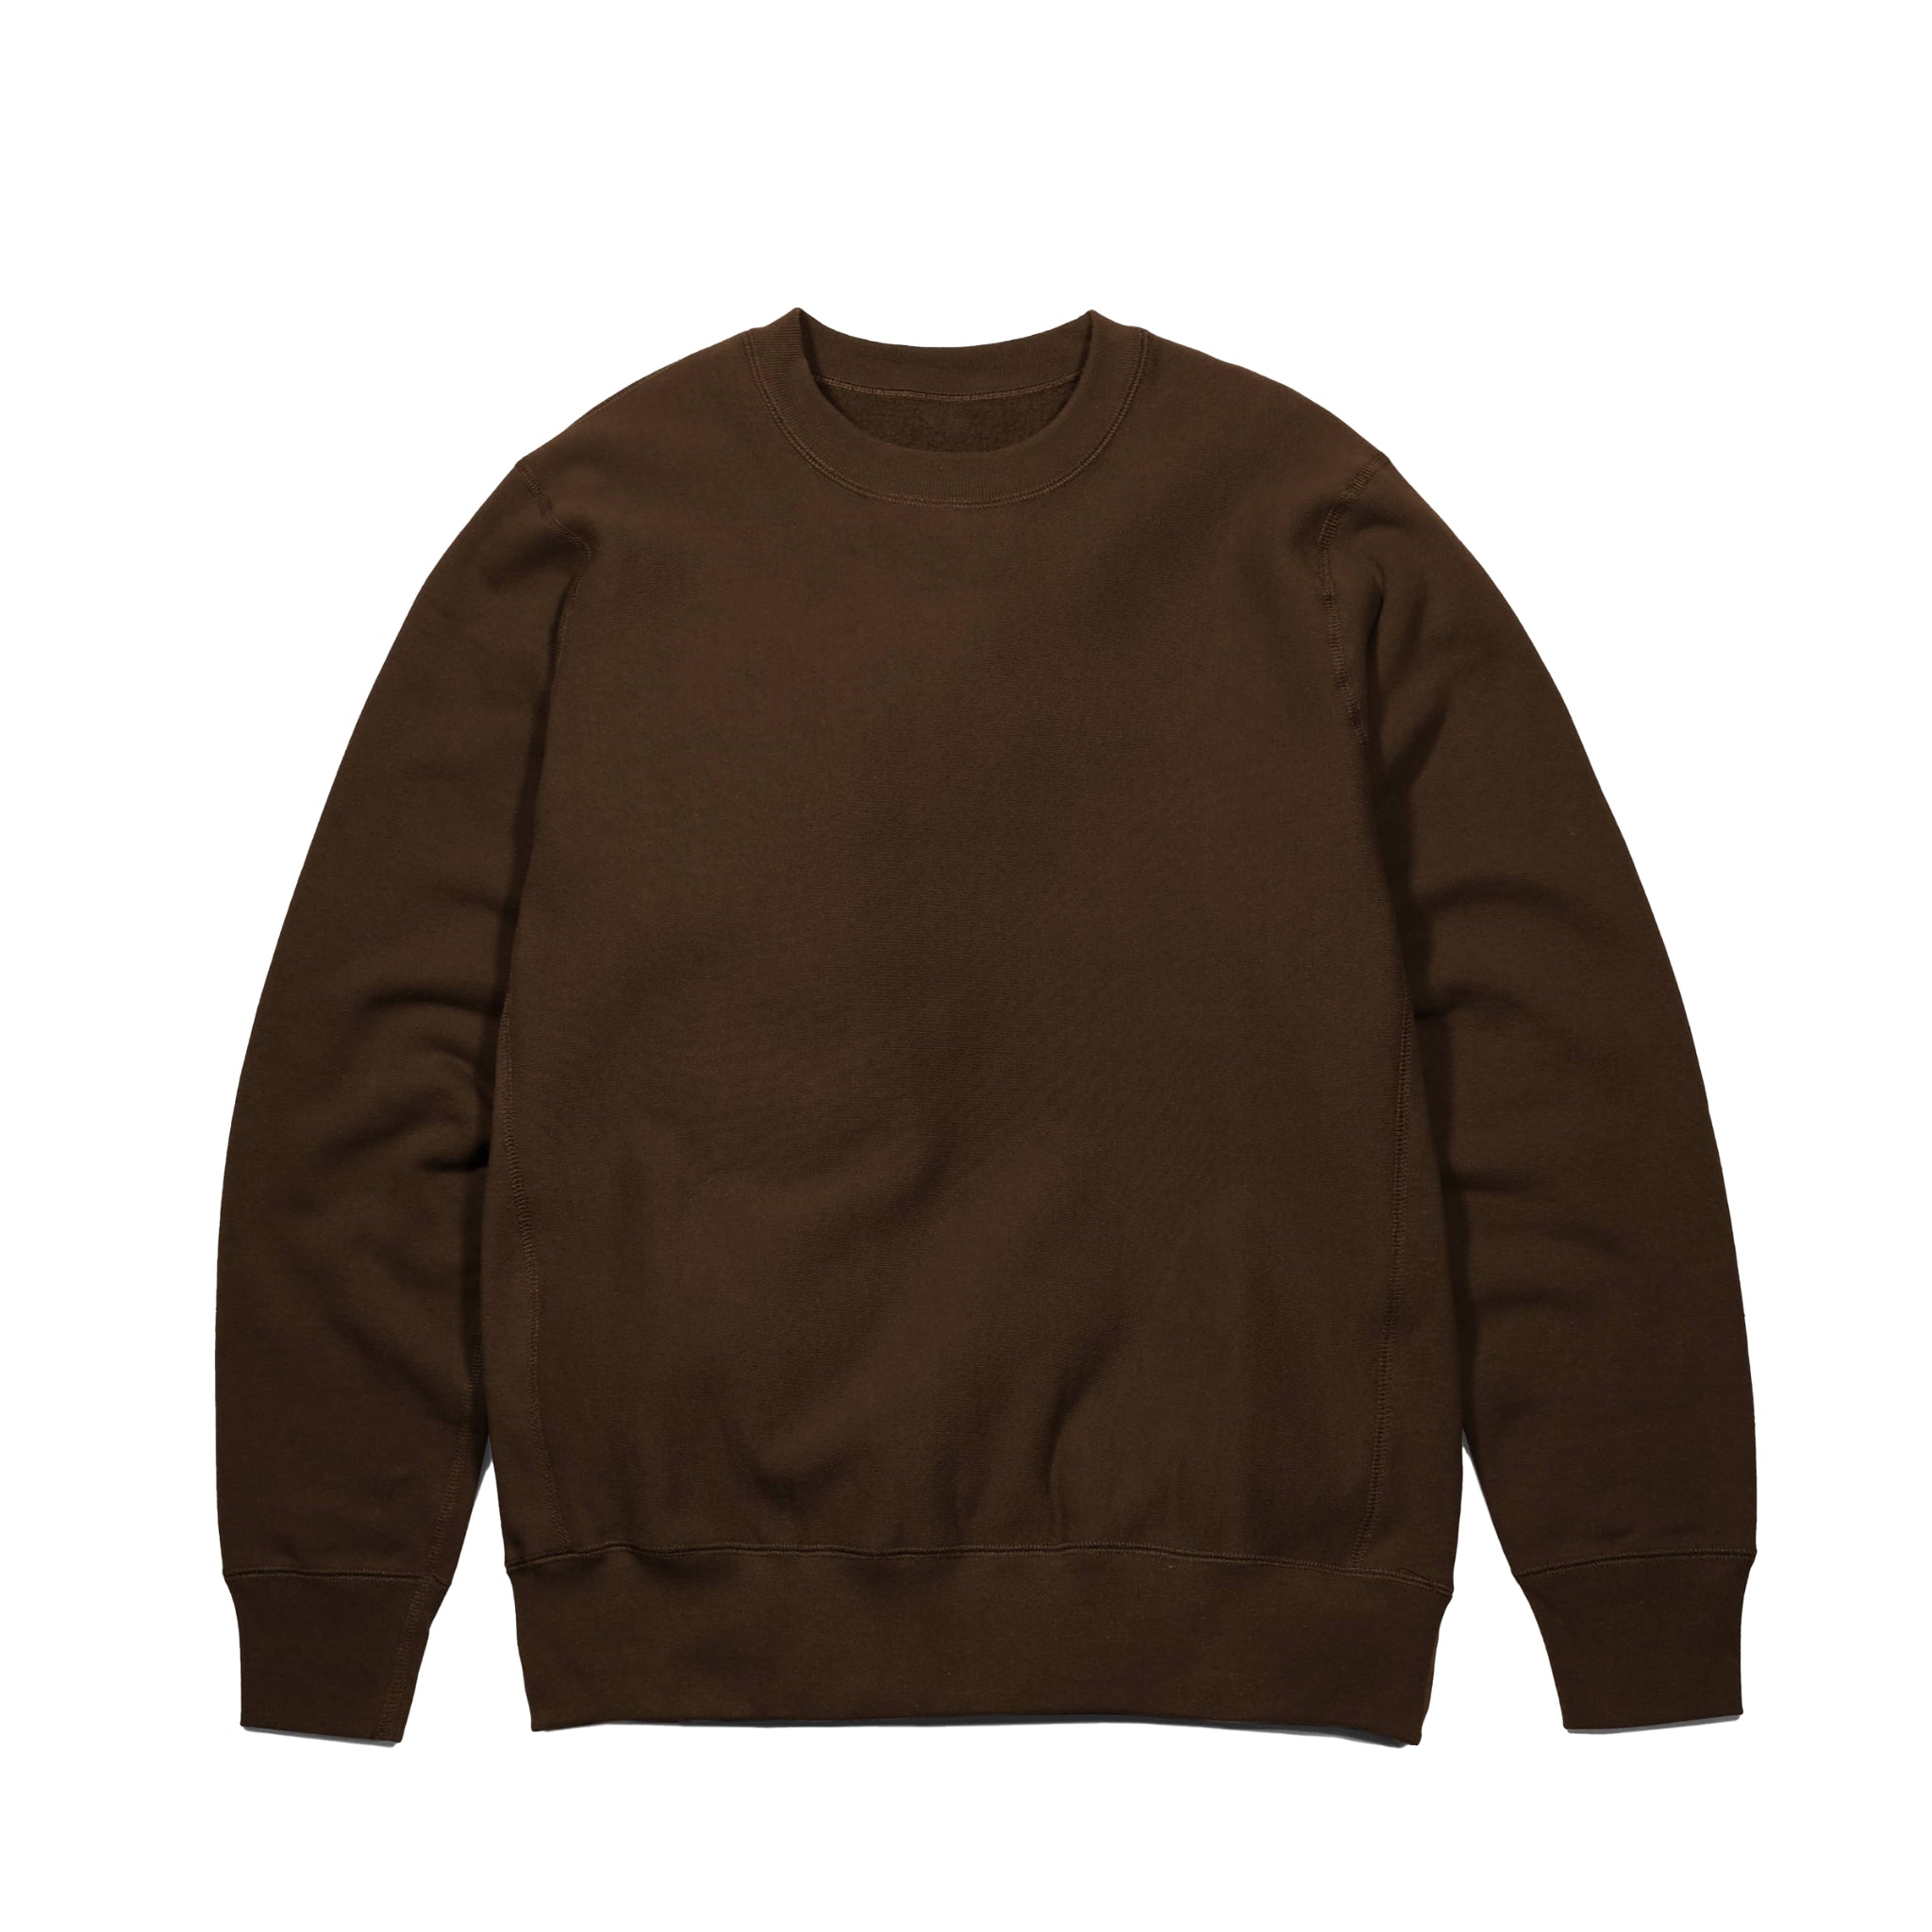 Front view of brown heavyweight knit crewneck in 100% cotton